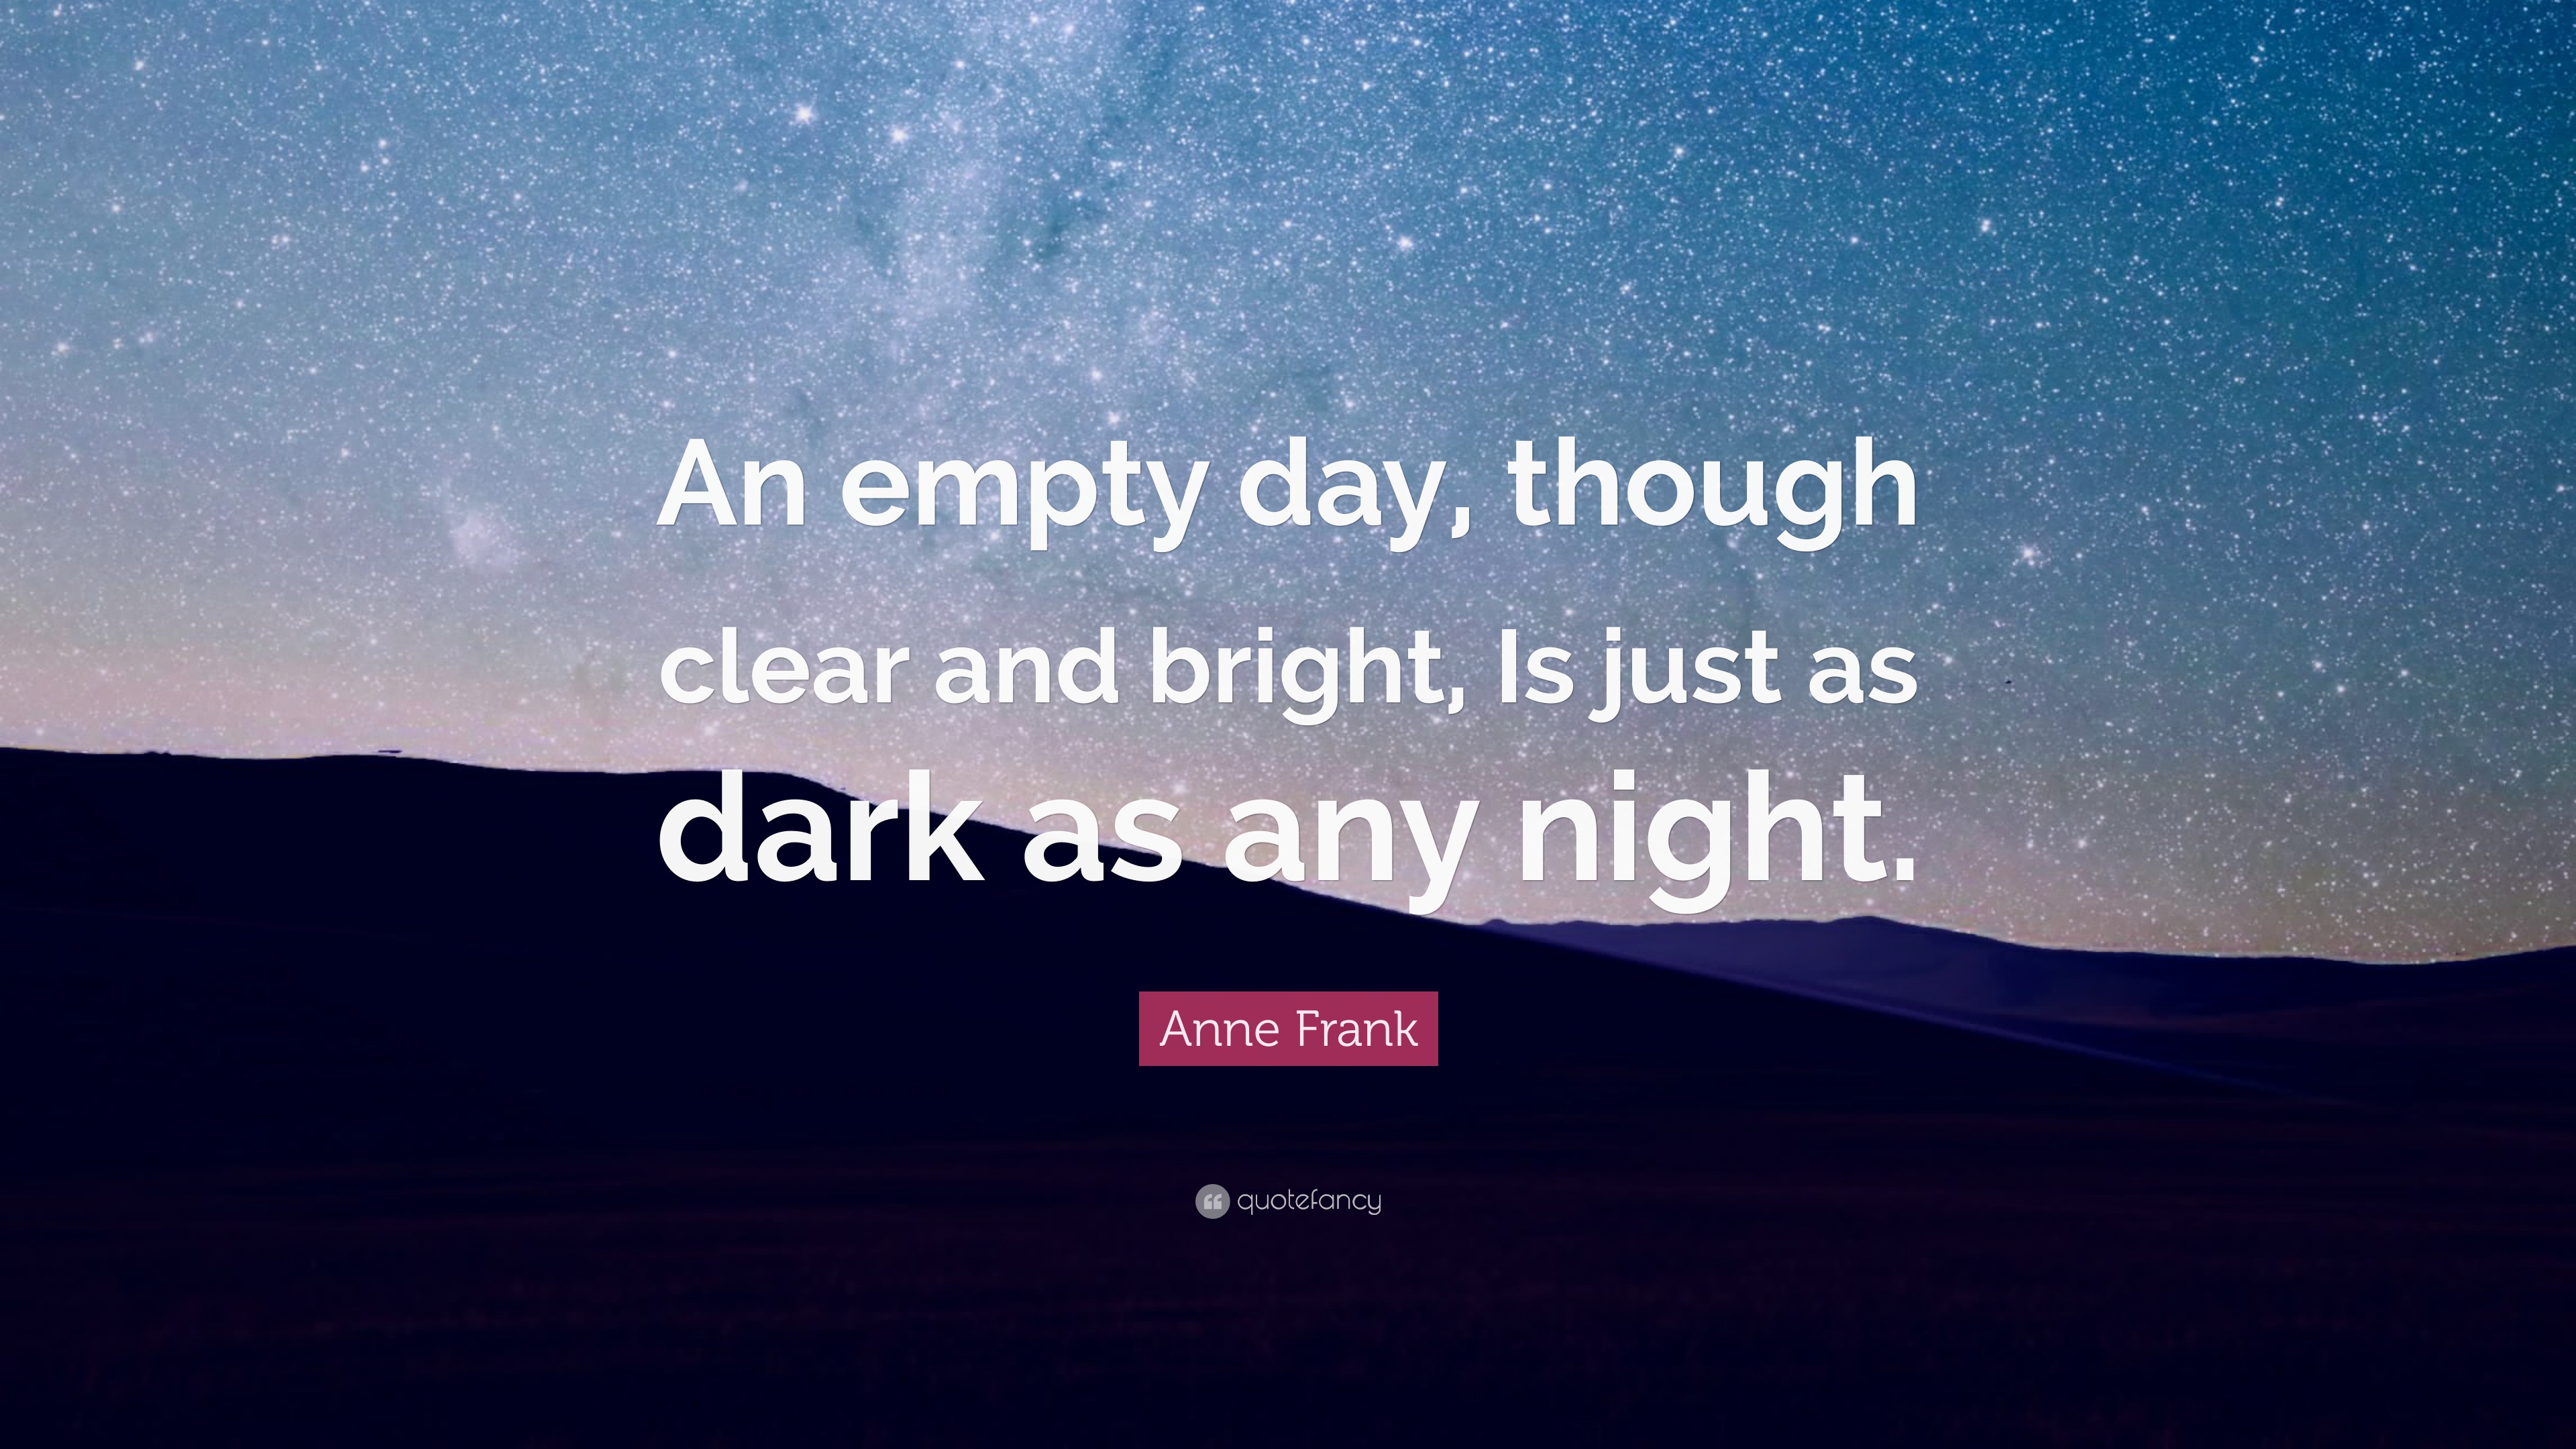 Anne Frank Quote: “An empty day, though clear and bright, Is just as ...